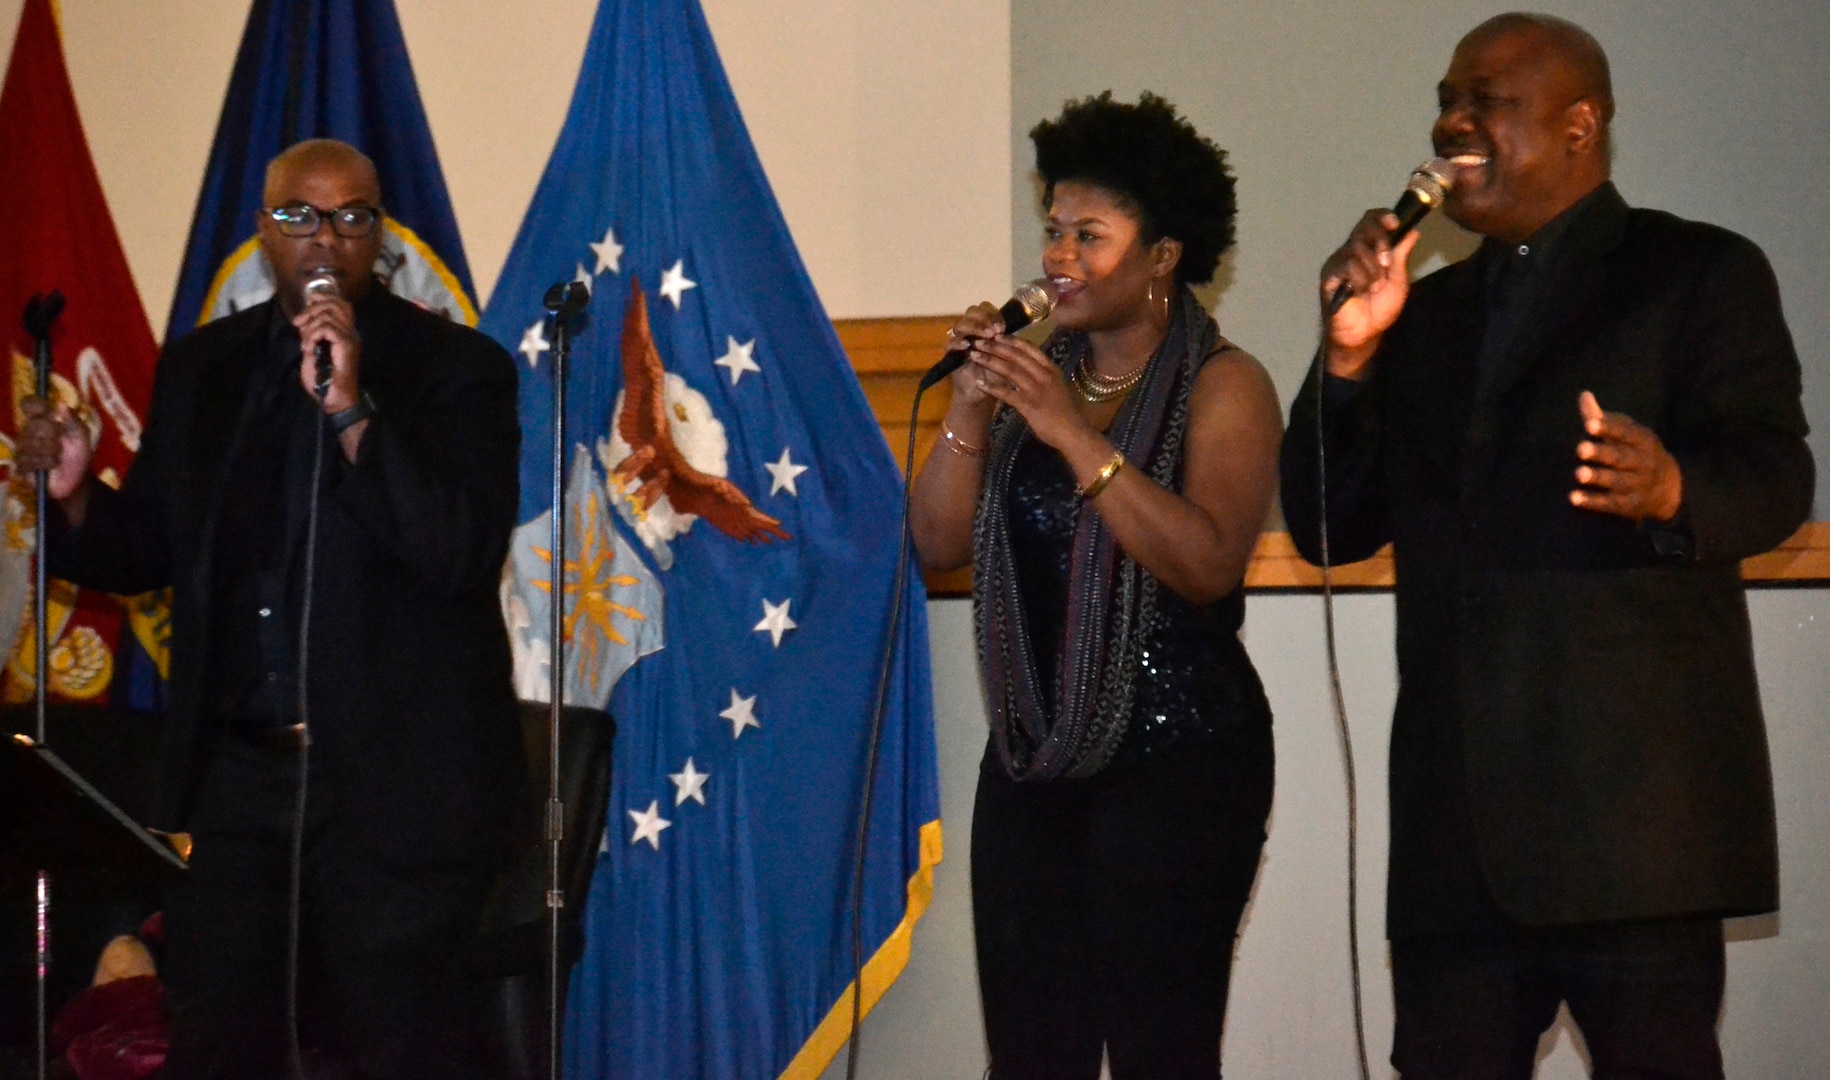 Key Arts performers Nathan Harmon, Shelia Moser and Joe Patterson, left to right, sing as employees clap along during DLA Troop Support’s celebration of African American History Month Feb. 27, 2019 in Philadelphia.